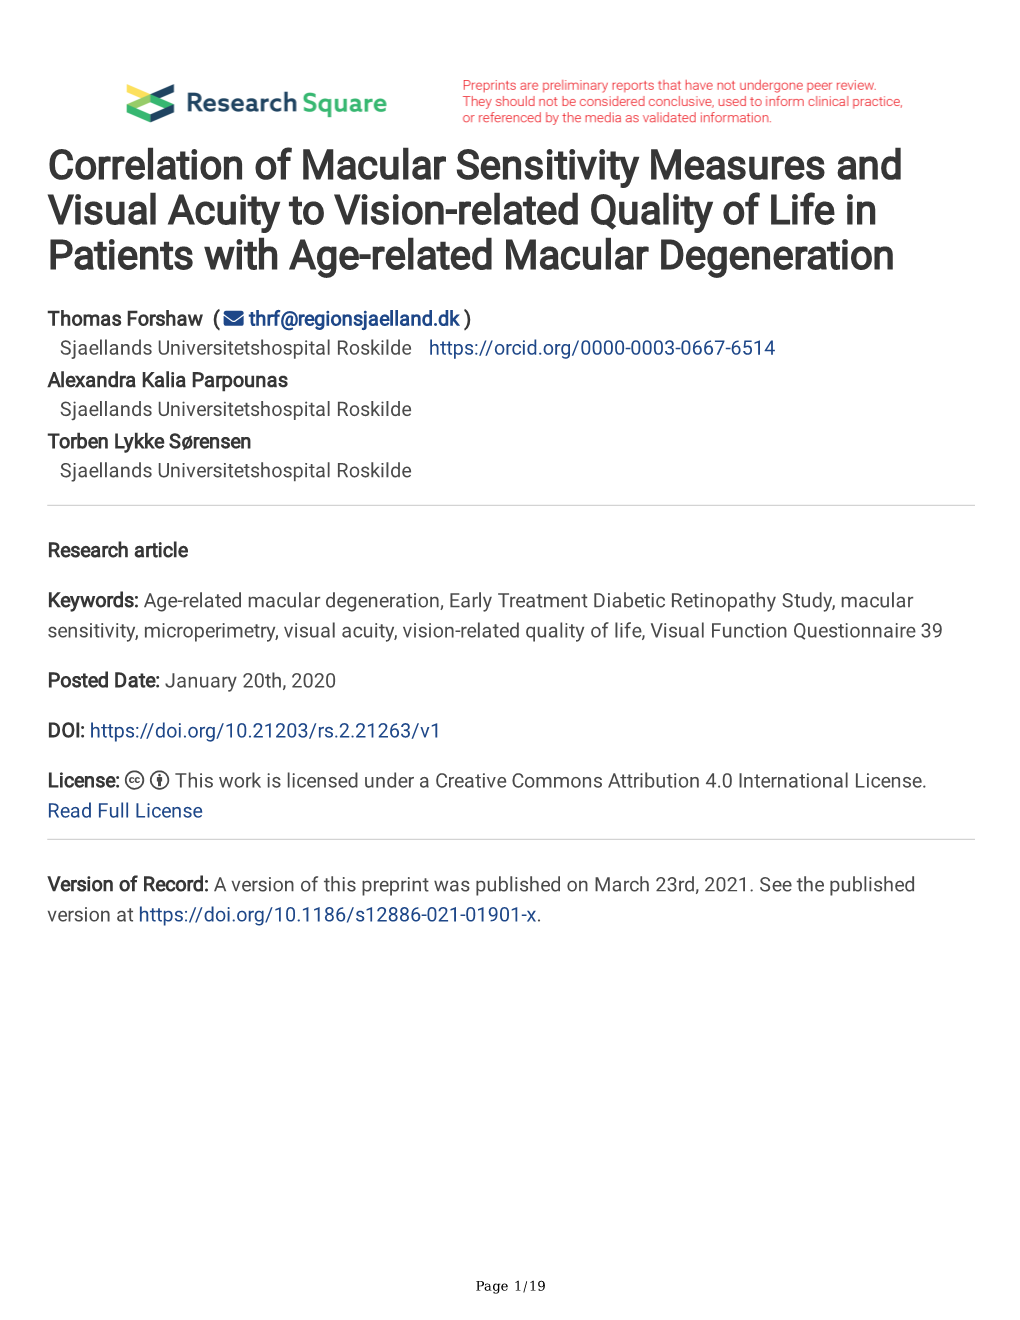 Correlation of Macular Sensitivity Measures and Visual Acuity to Vision-Related Quality of Life in Patients with Age-Related Macular Degeneration